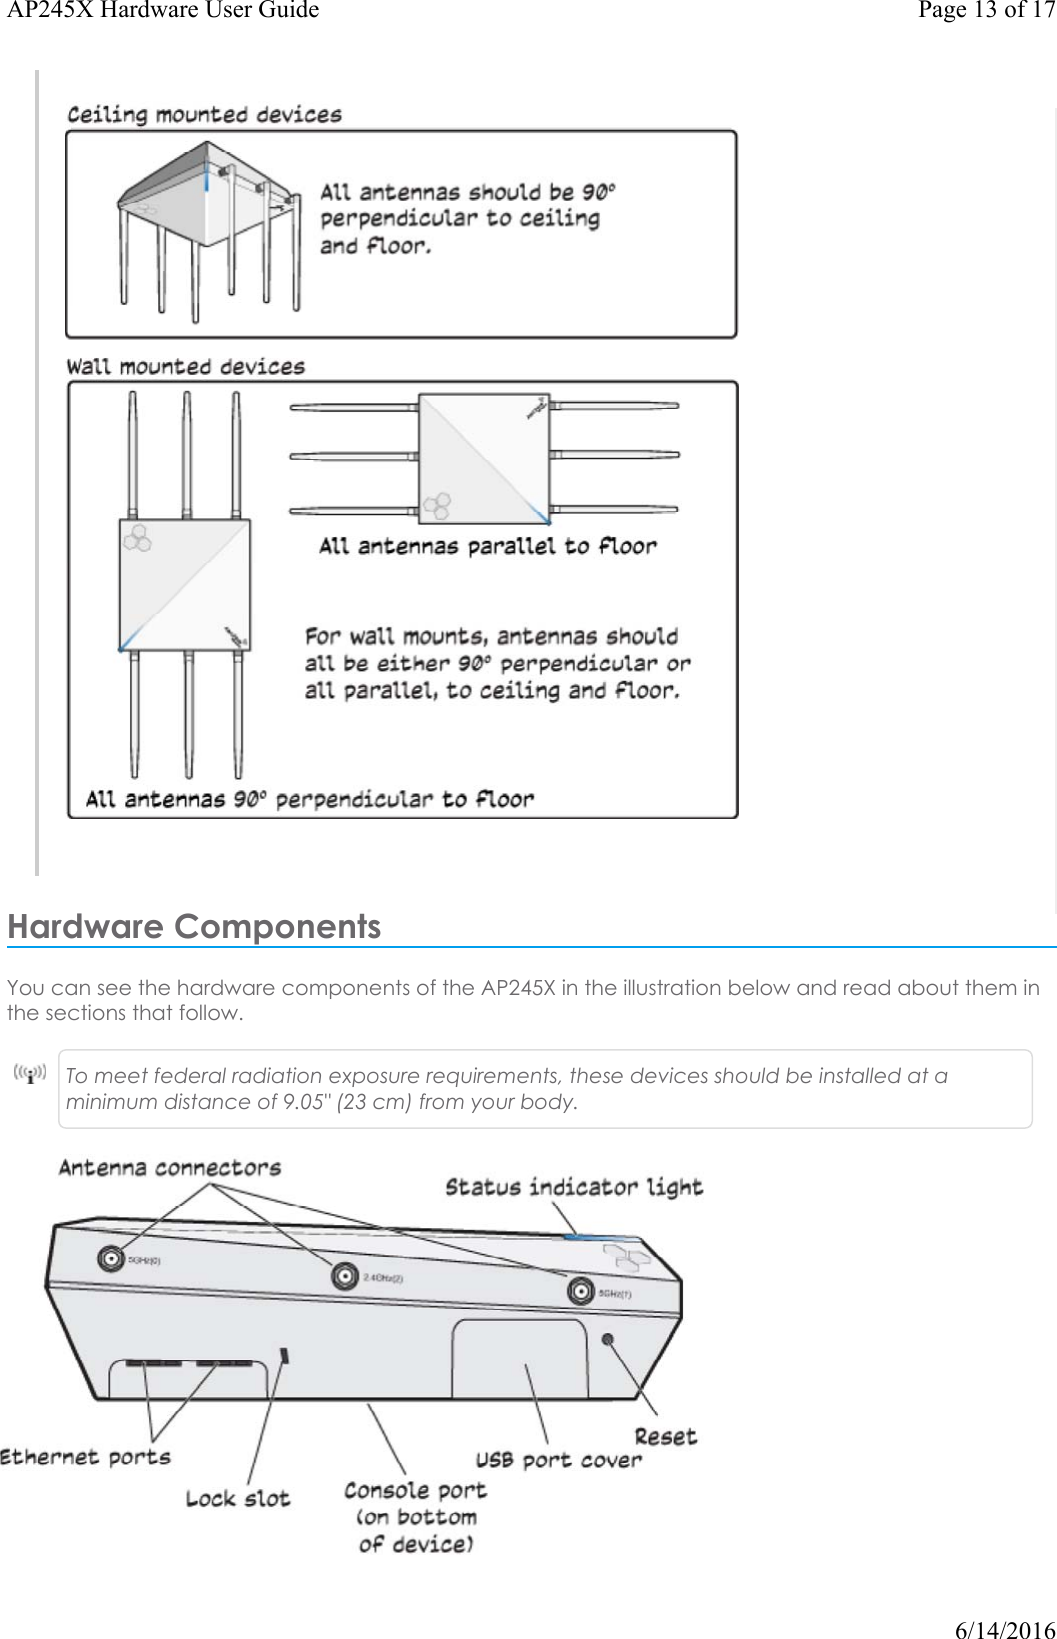 Hardware ComponentsYou can see the hardware components of the AP245X in the illustration below and read about them in the sections that follow.To meet federal radiation exposure requirements, these devices should be installed at a minimum distance of 9.05&quot; (23 cm) from your body.Page 13 of 17AP245X Hardware User Guide6/14/2016